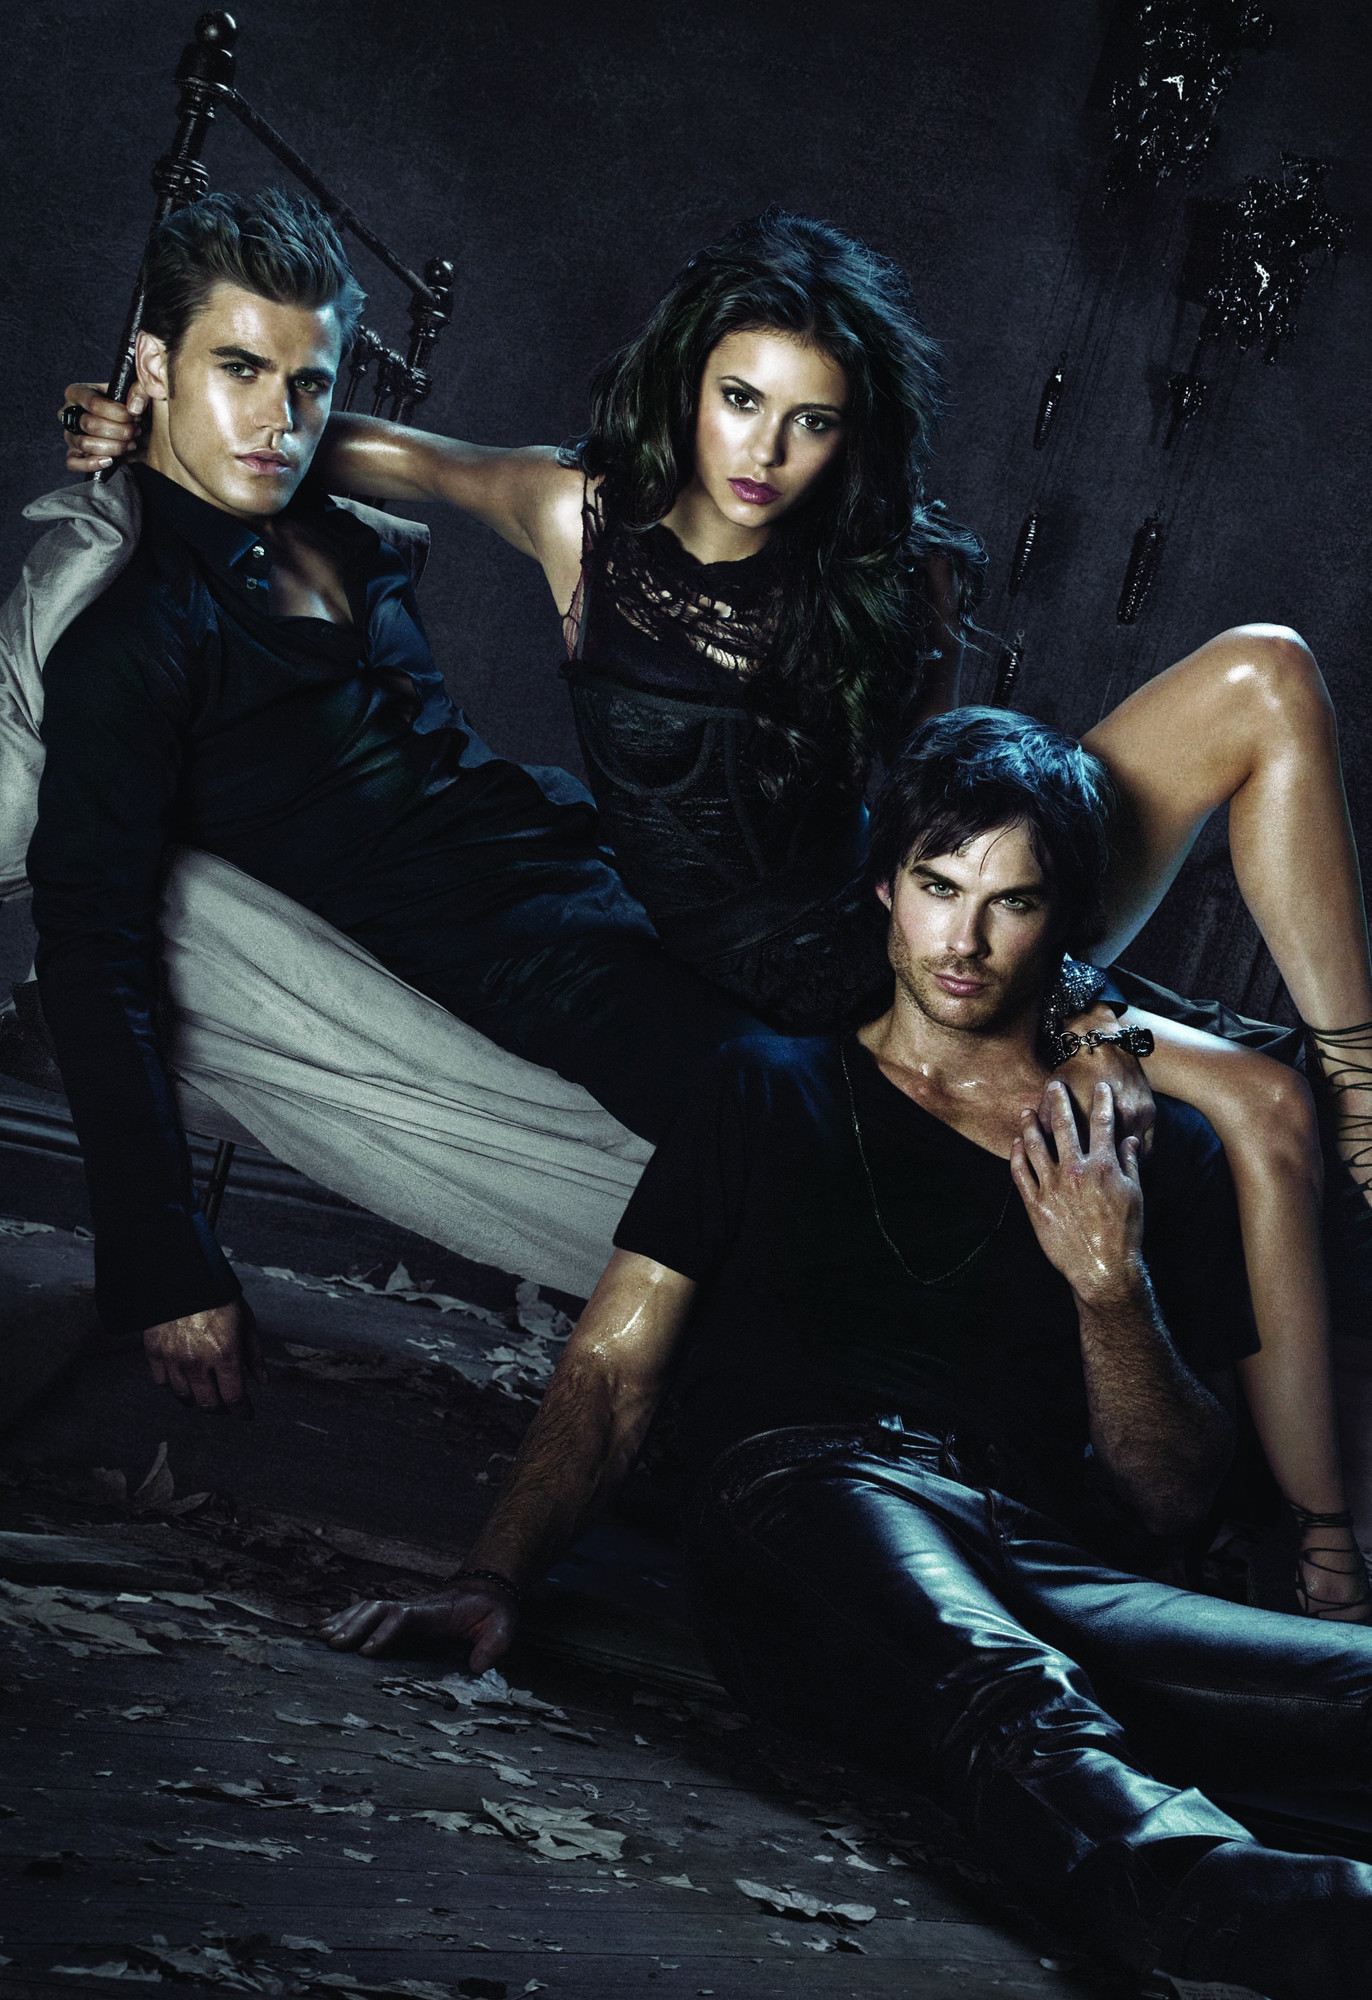 1372x2000 100 best vampire diaries images on Pinterest | The vampire diaries, Vampires  and Vampire dairies